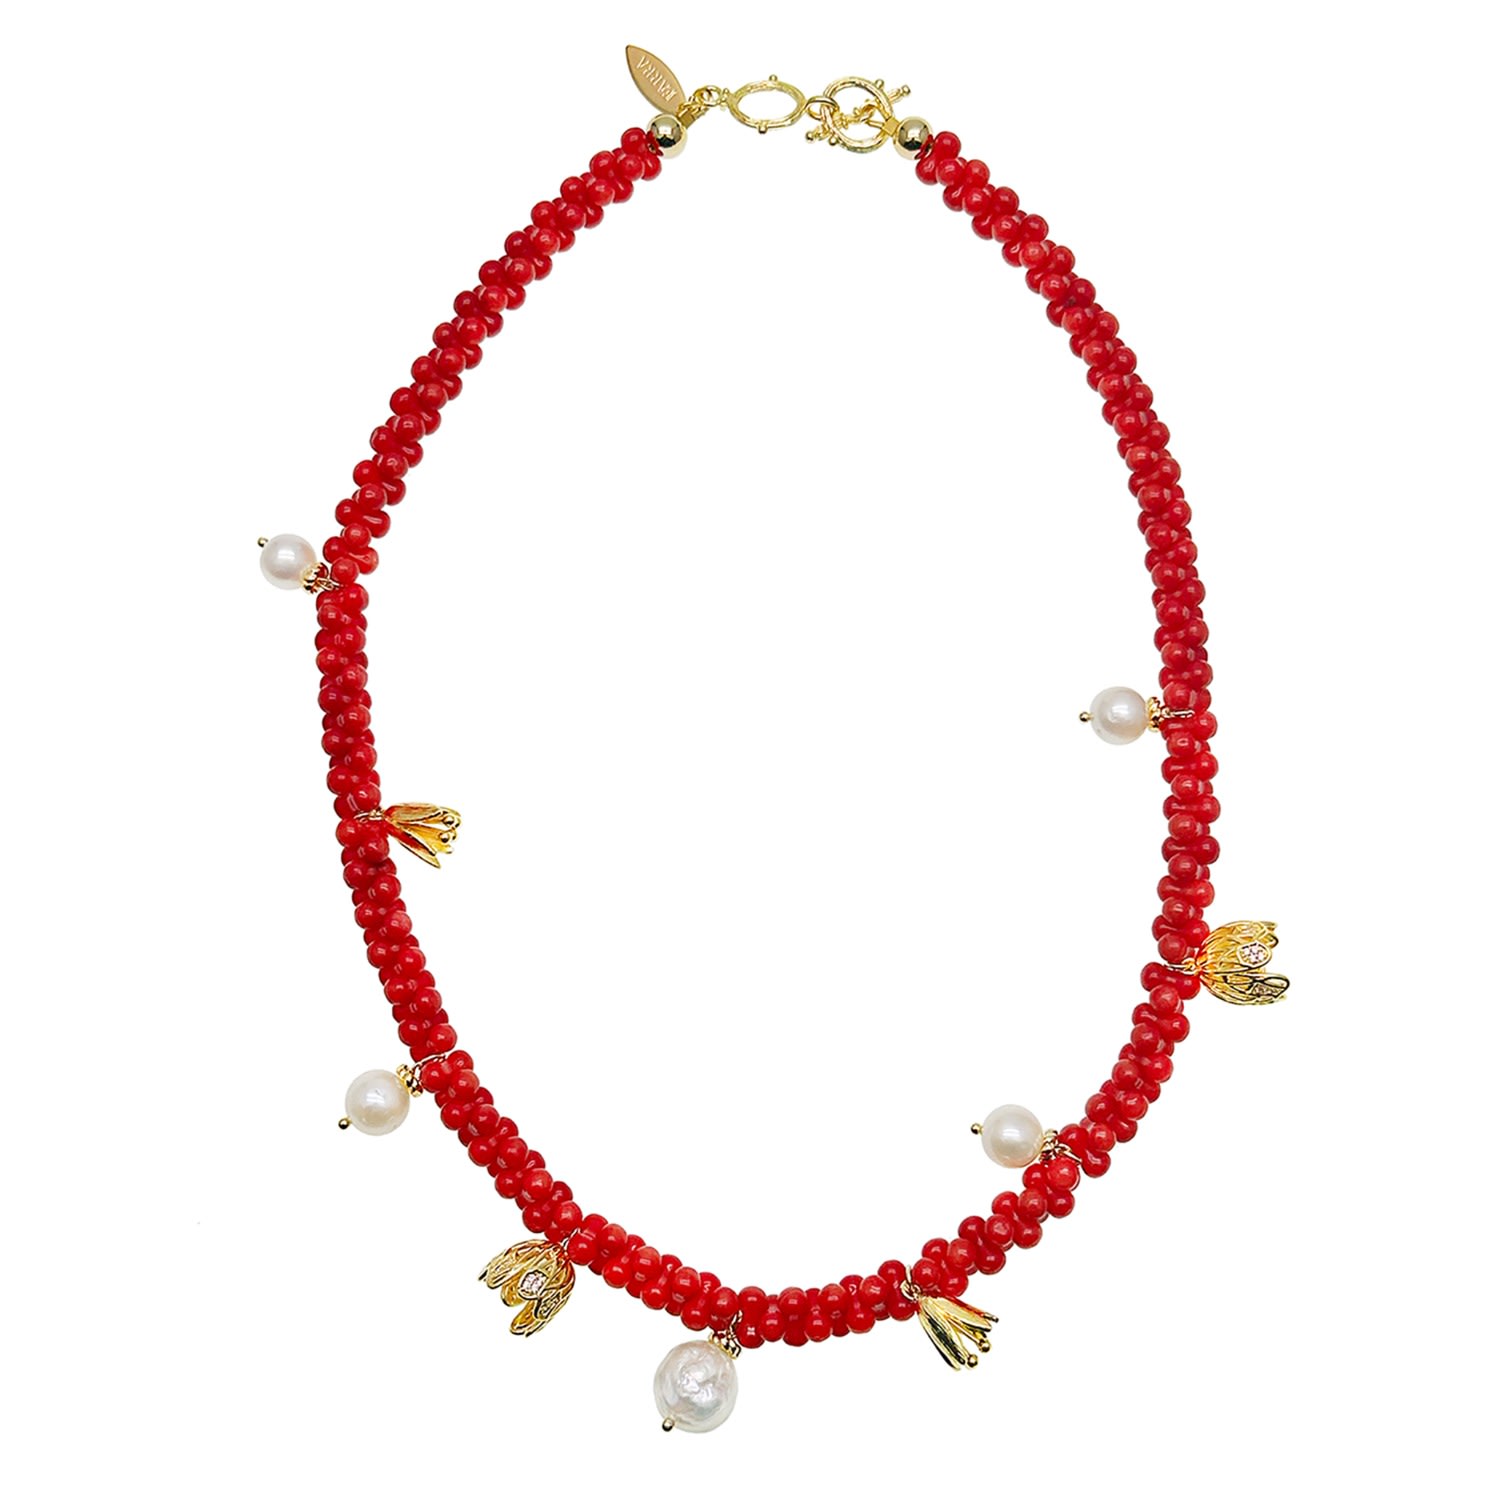 Farra Women's Peanut Shaped Red Coral Statement Necklace